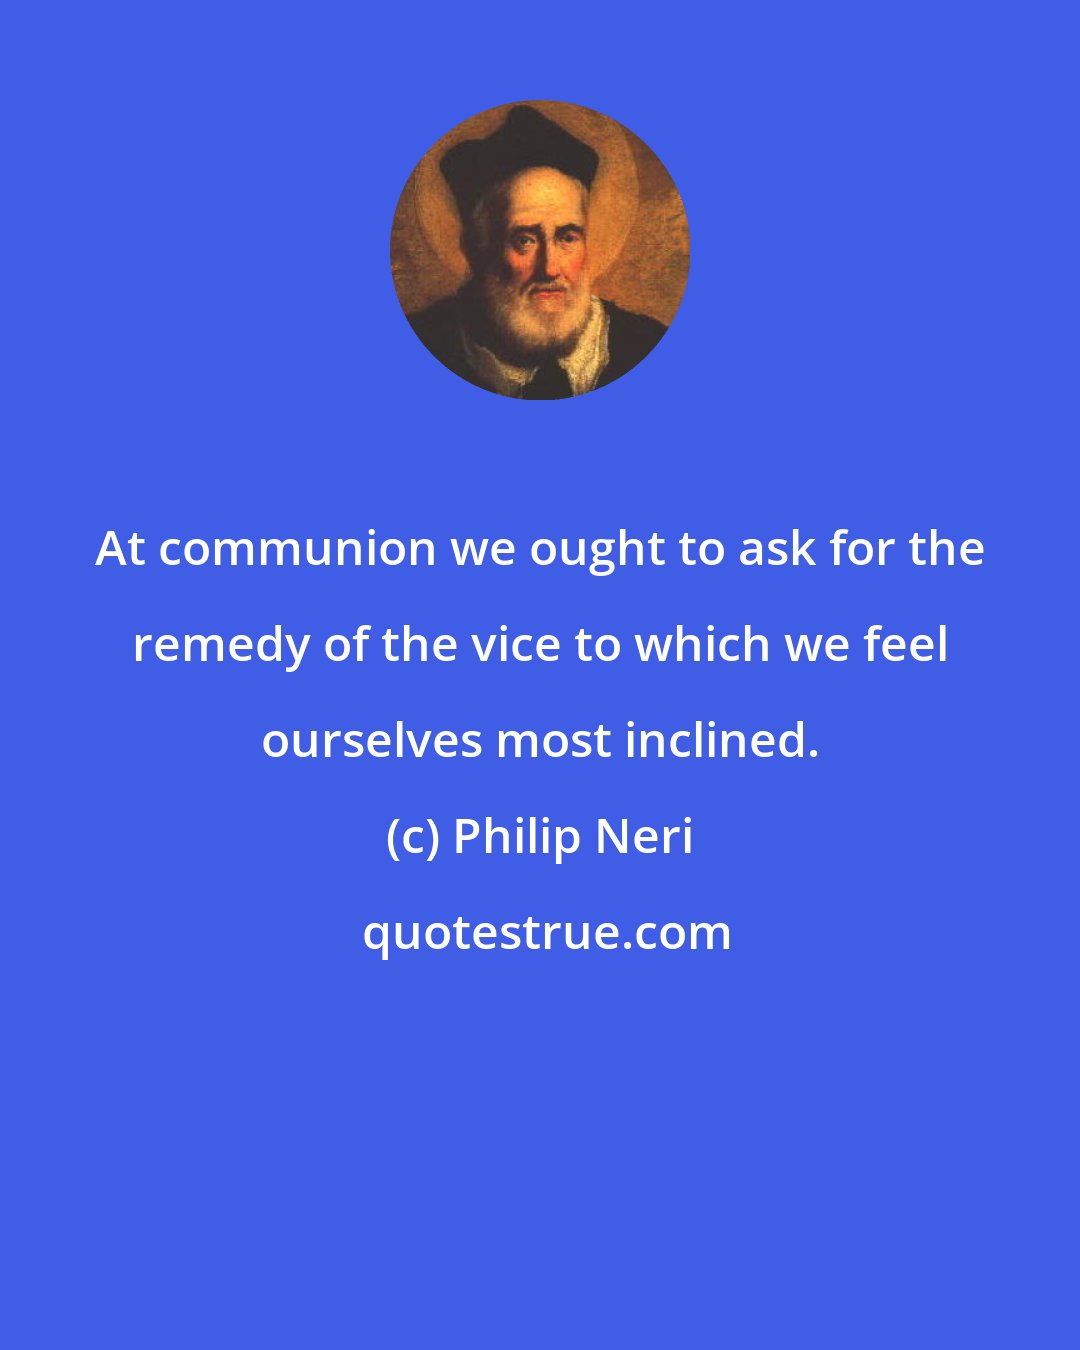 Philip Neri: At communion we ought to ask for the remedy of the vice to which we feel ourselves most inclined.